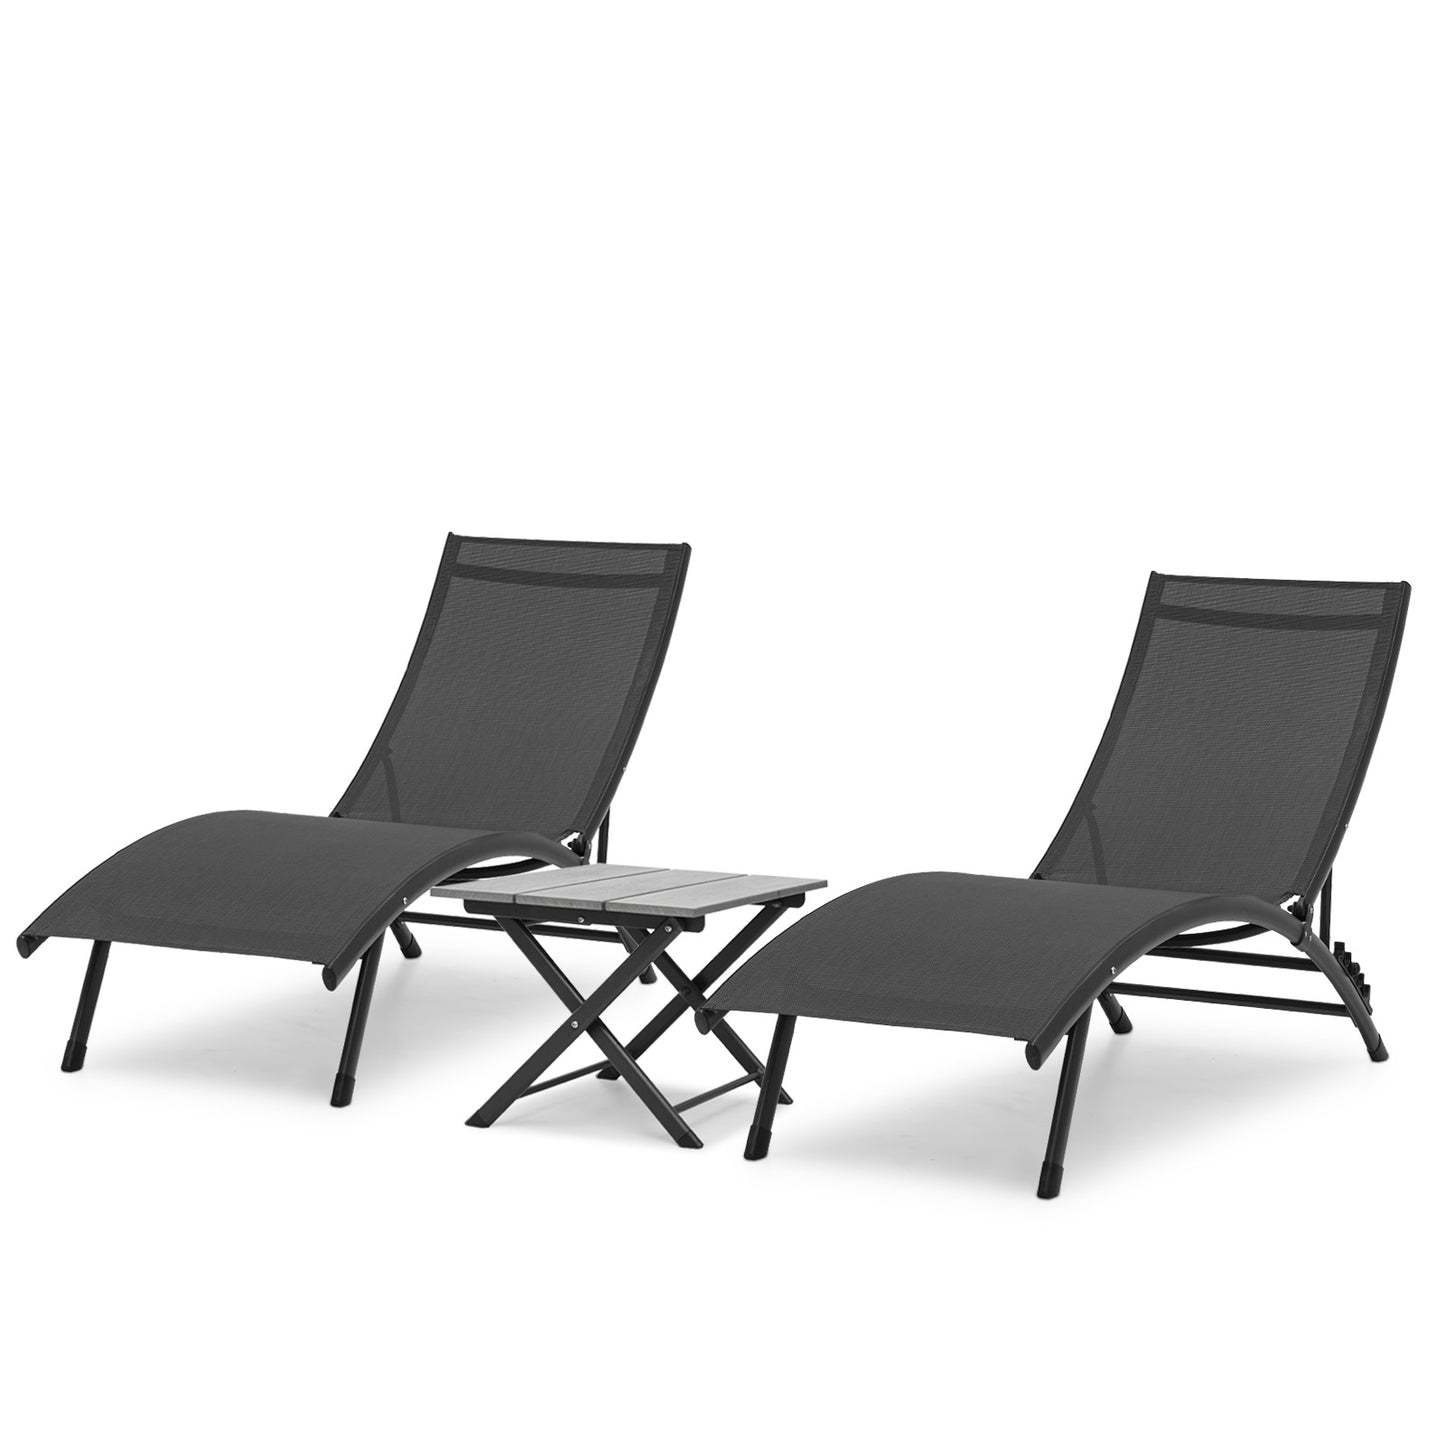 Patio Set - 2 Lounge Chair + 1 Side Table